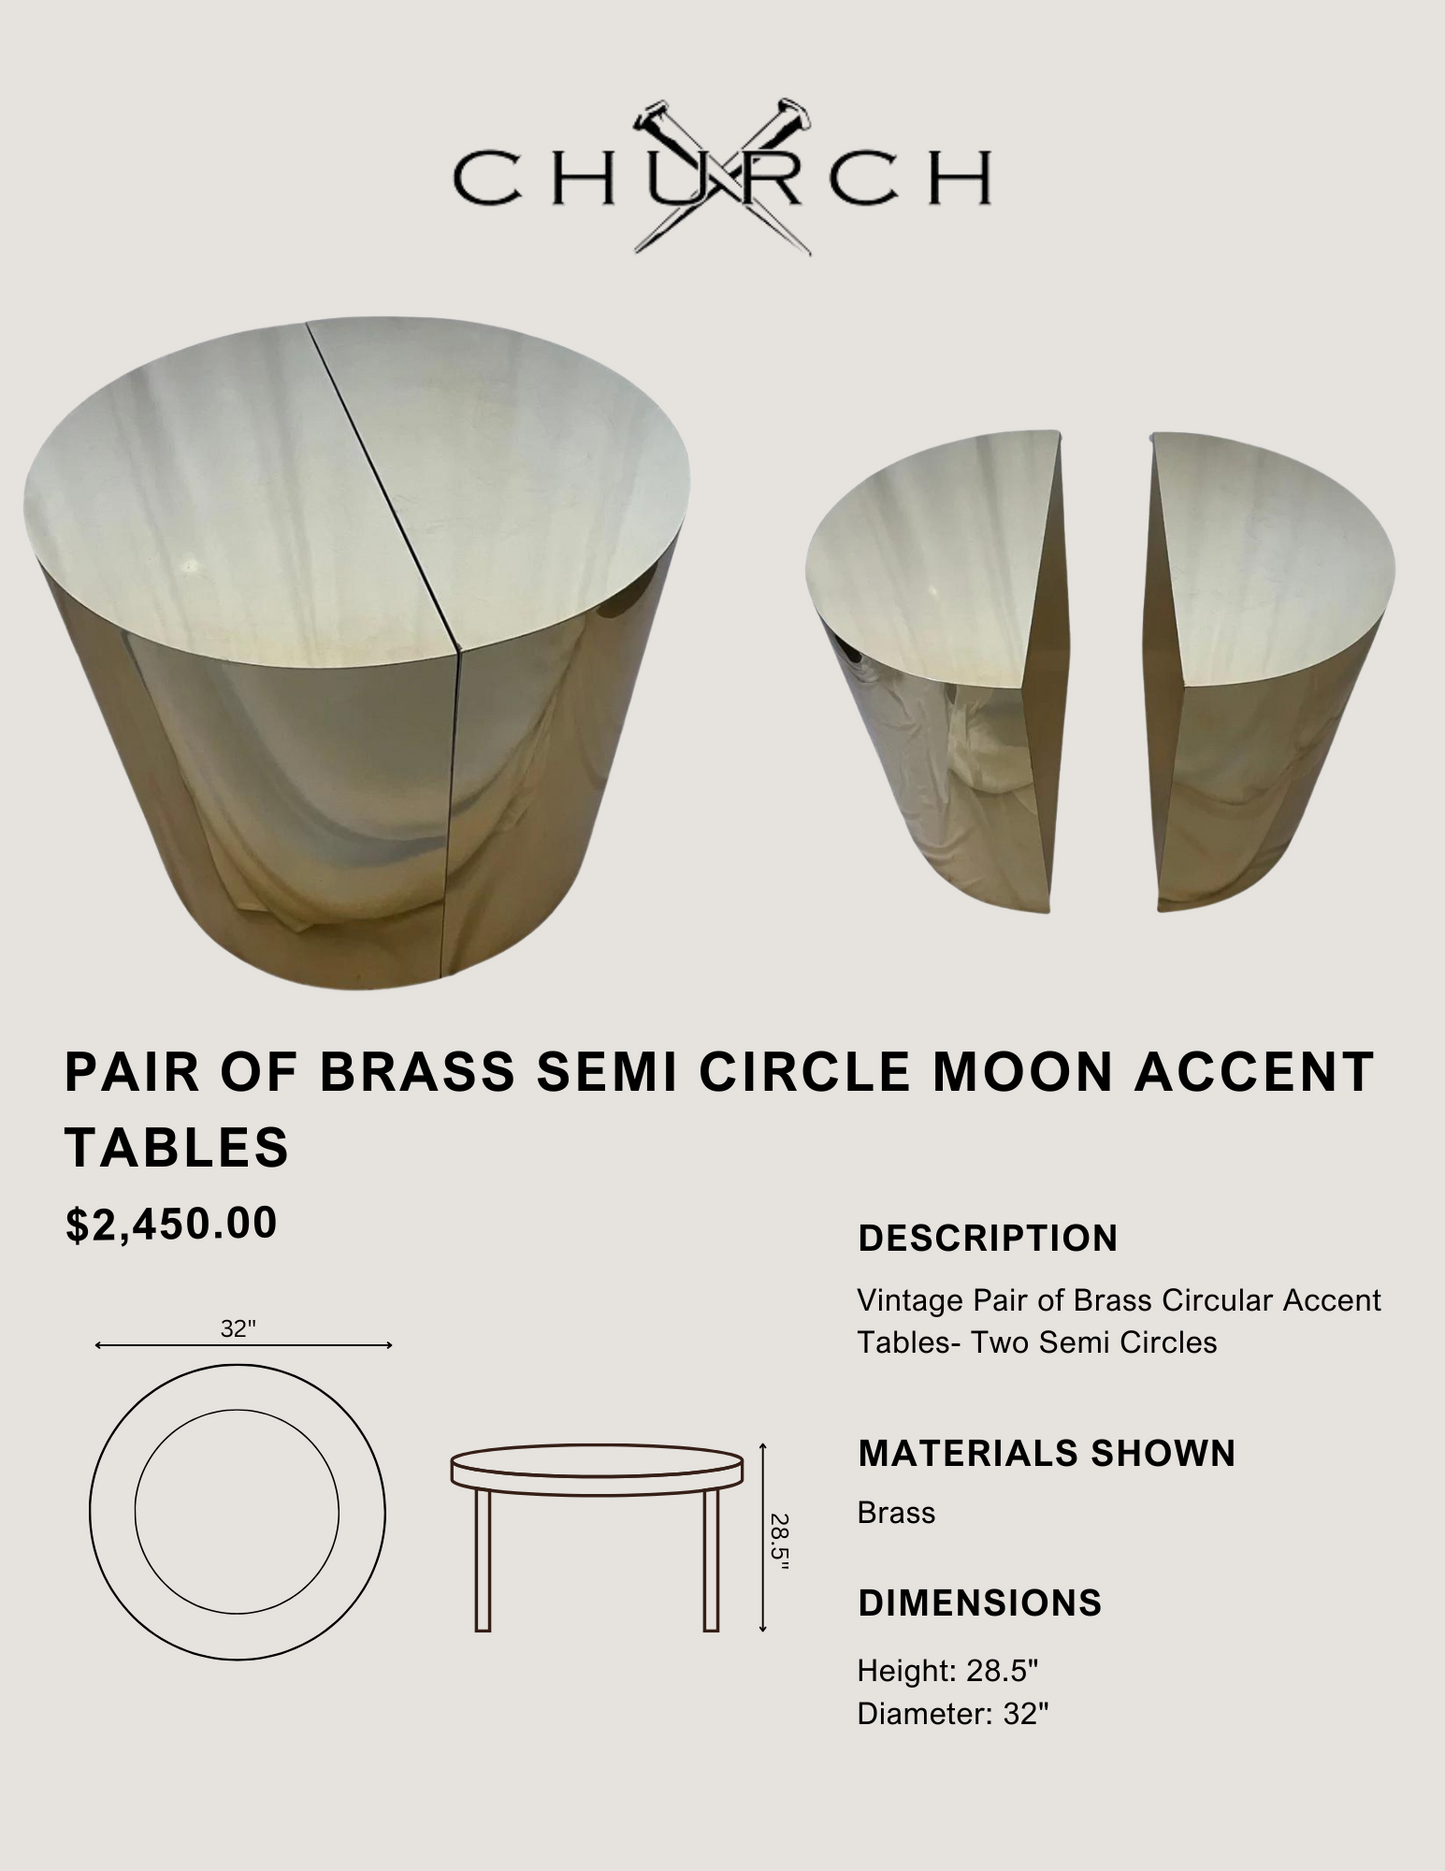 Pair of Brass Semi Circle Moon Accent Tables